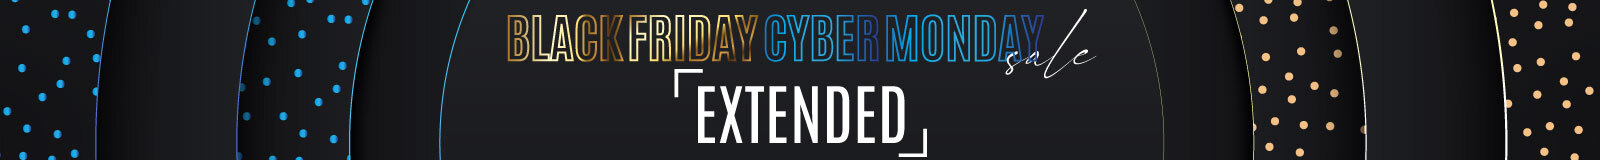 Black Friday Cyber Monday Extended Sale